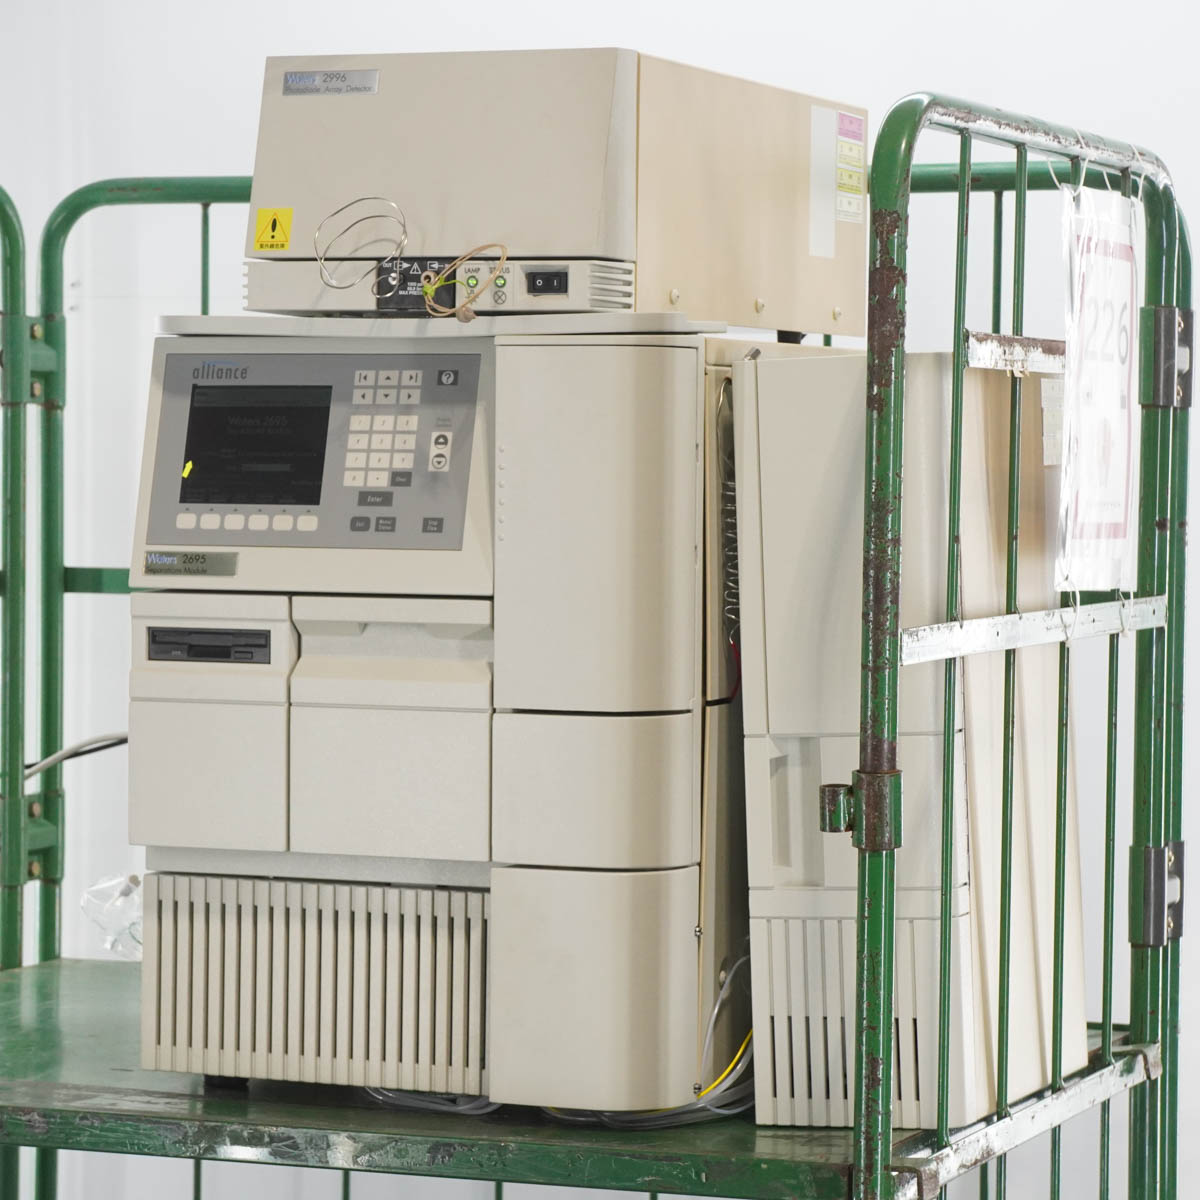 [DW]USED 8日保証 セット Waters 2695 2414 2487 SHC alliance hplc Separations Module...[ST02938-0017] - 5